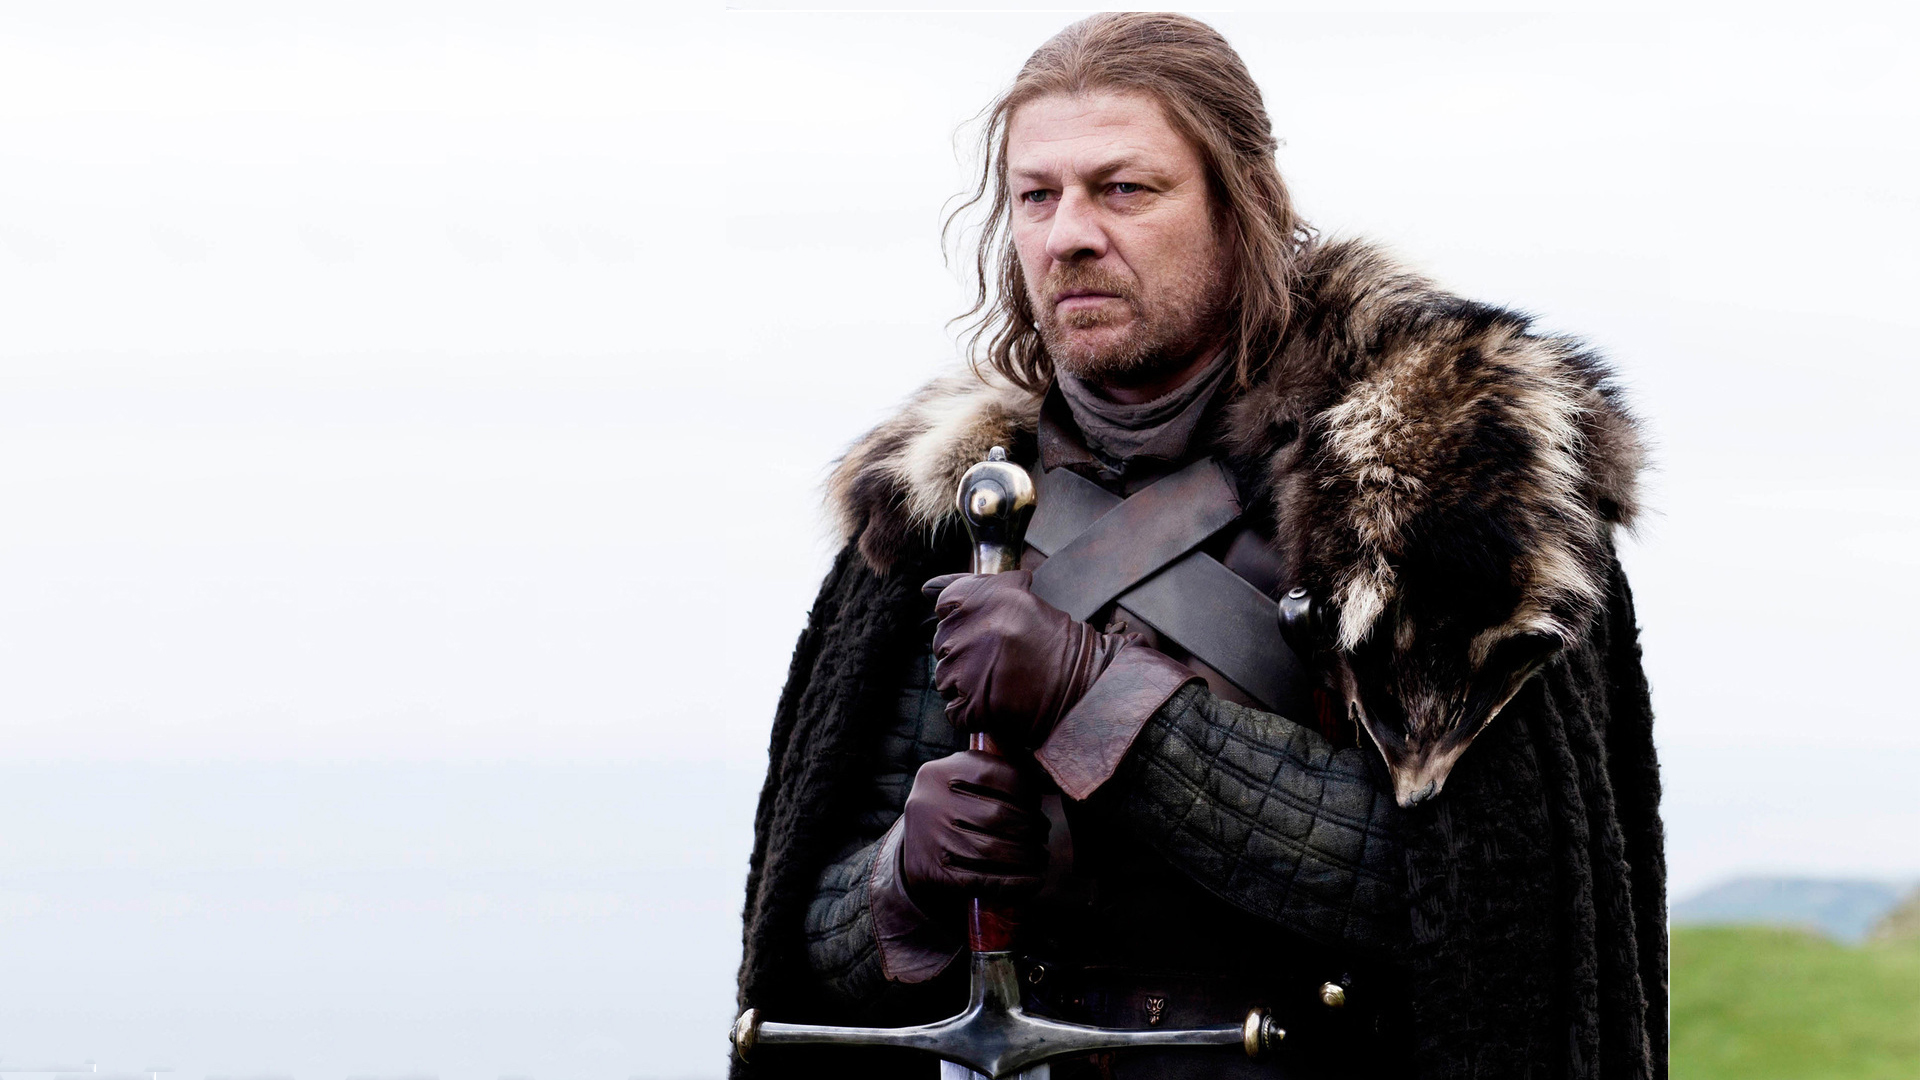 game, Of, Thrones, A, Song, Of, Ice, And, Fire, Sean, Bean, Tv, Series, Eddard, And039nedand039, Stark, Swords, House, Stark Wallpaper